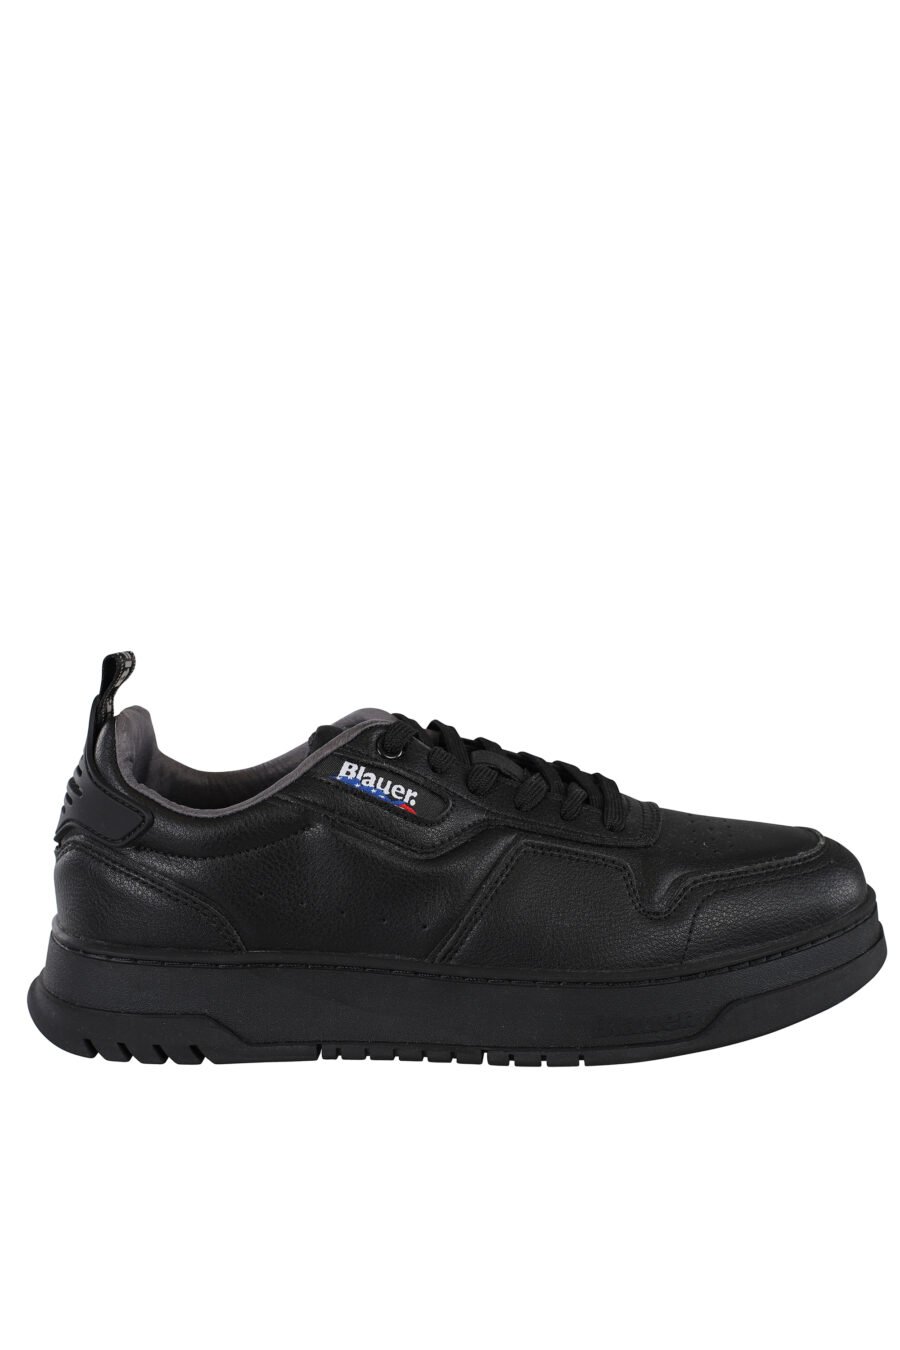 Trainers "harper" black leather with logo - IMG 6827